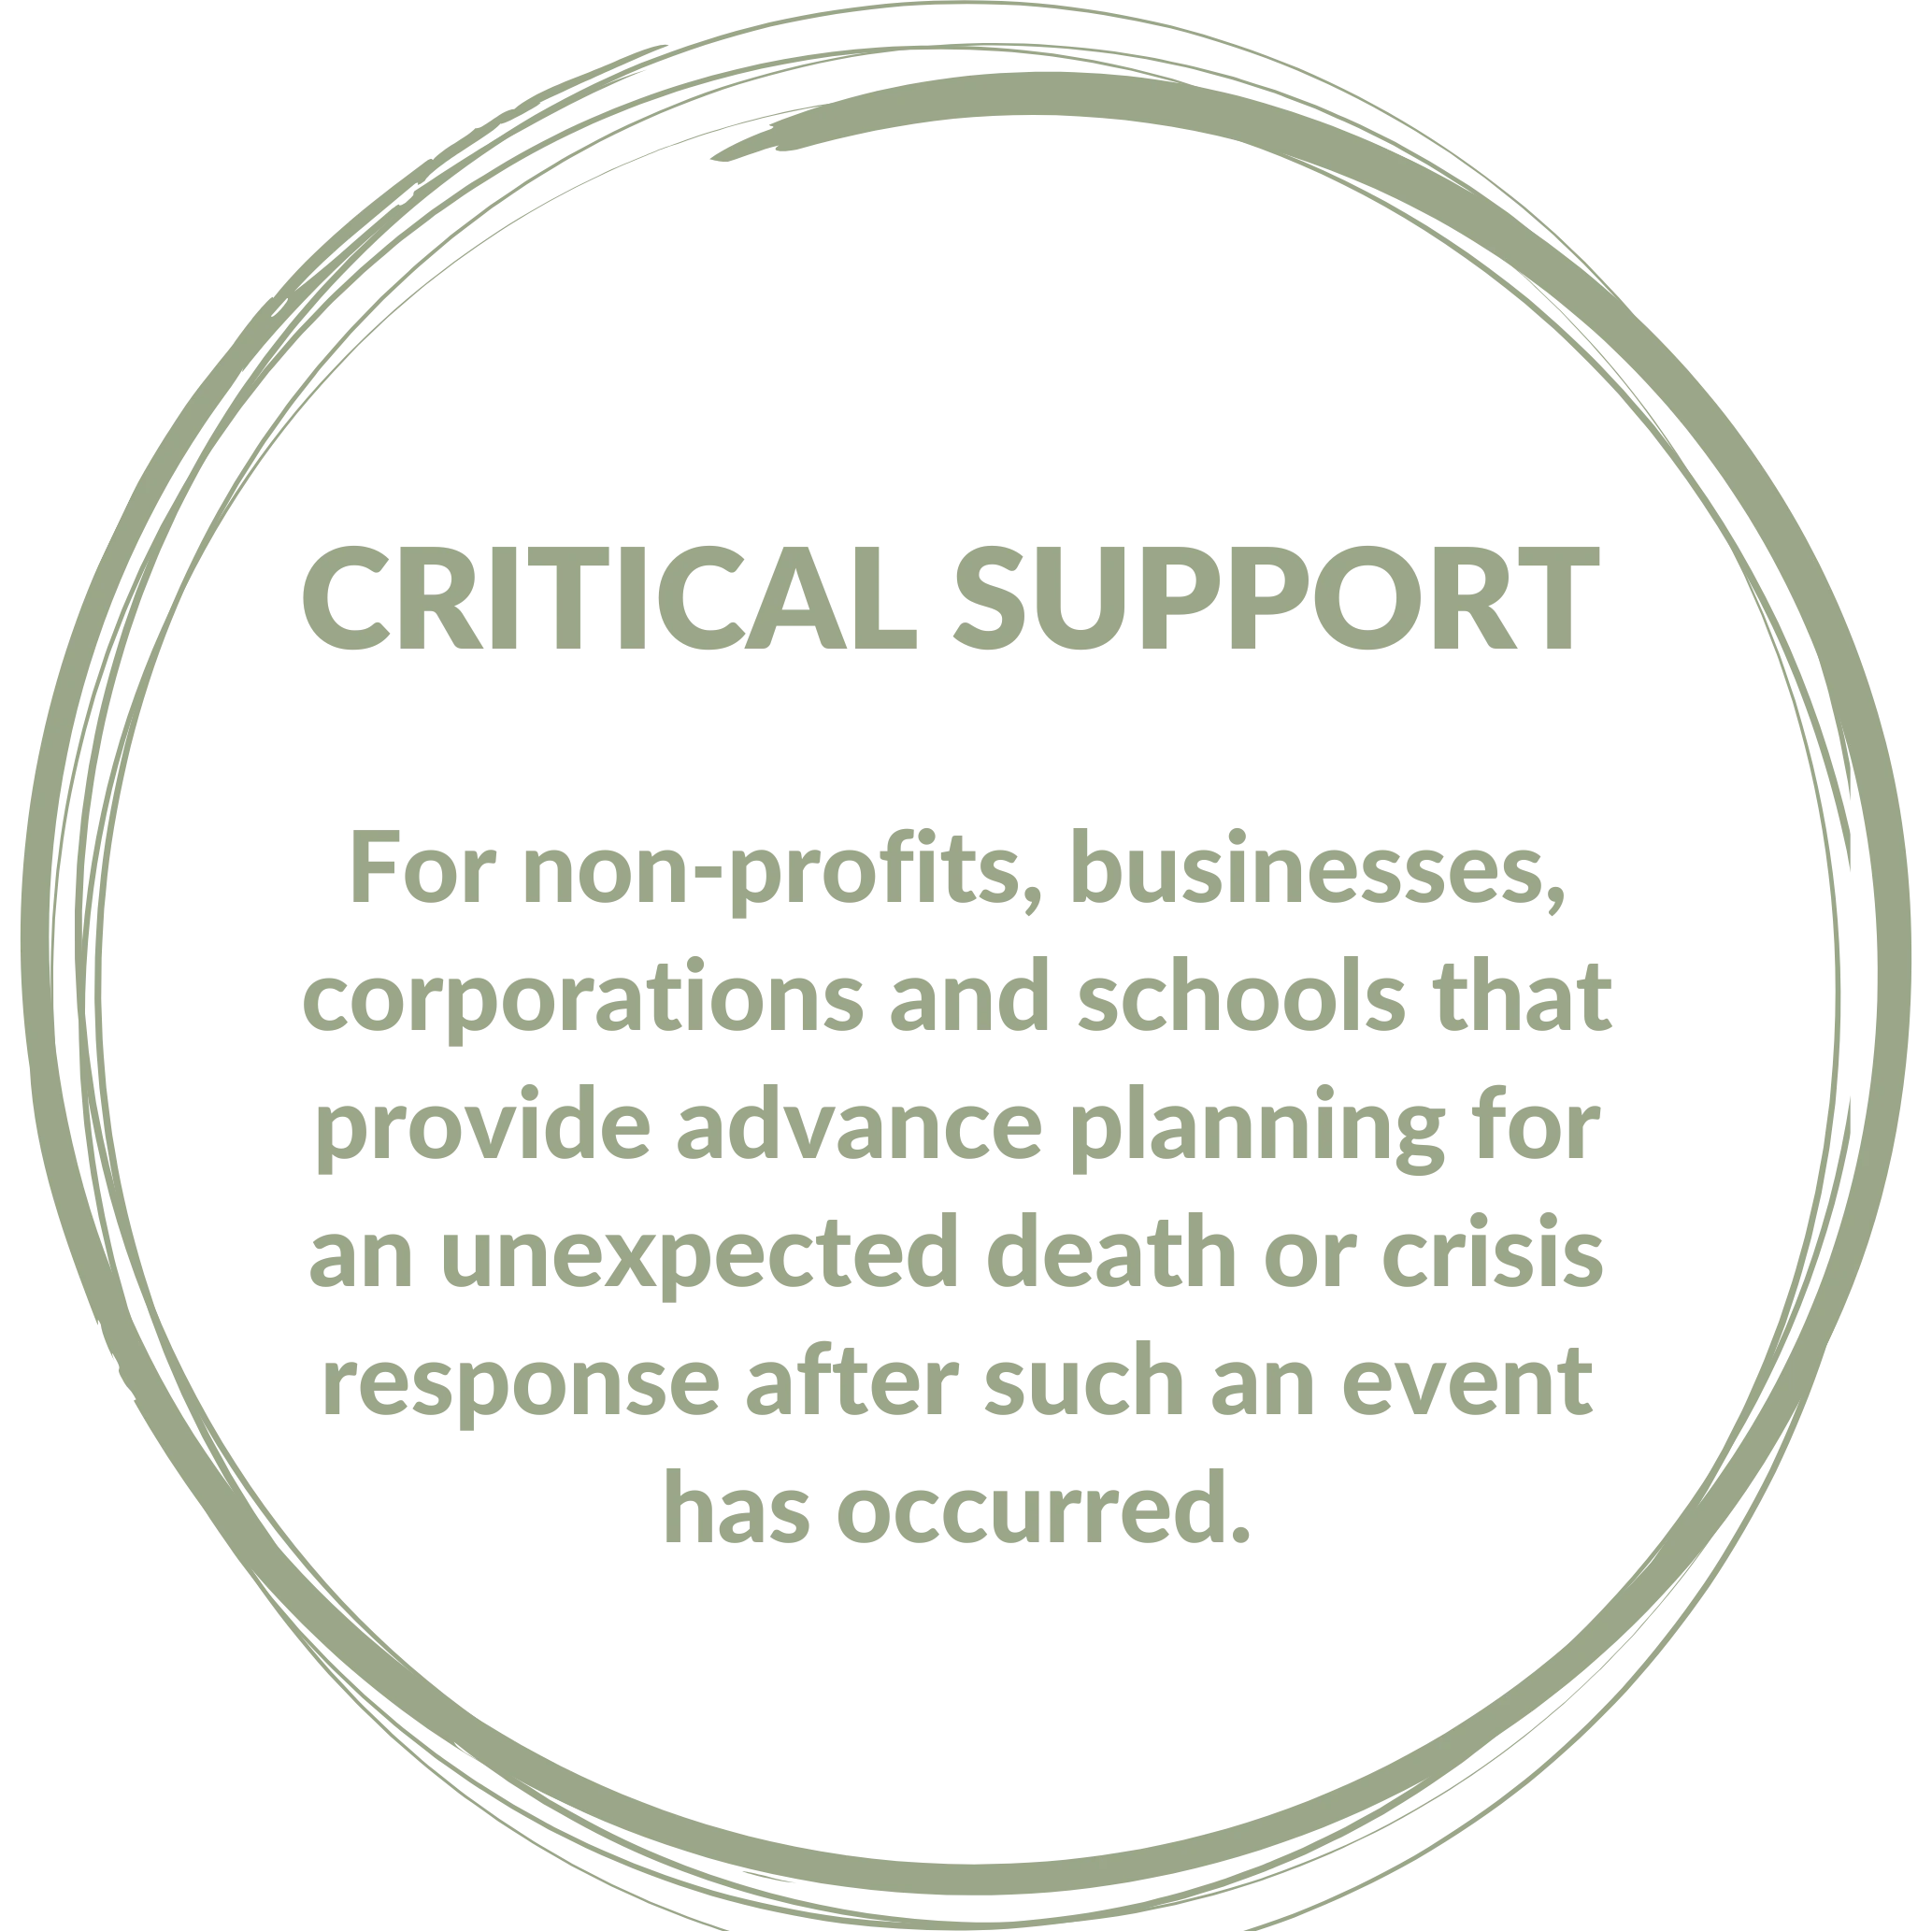 CRITICAL SUPPORT For non-profits, businesses, corporations and schools that provide advance planning for an unexpected death or crisis response after such an event has occurred.